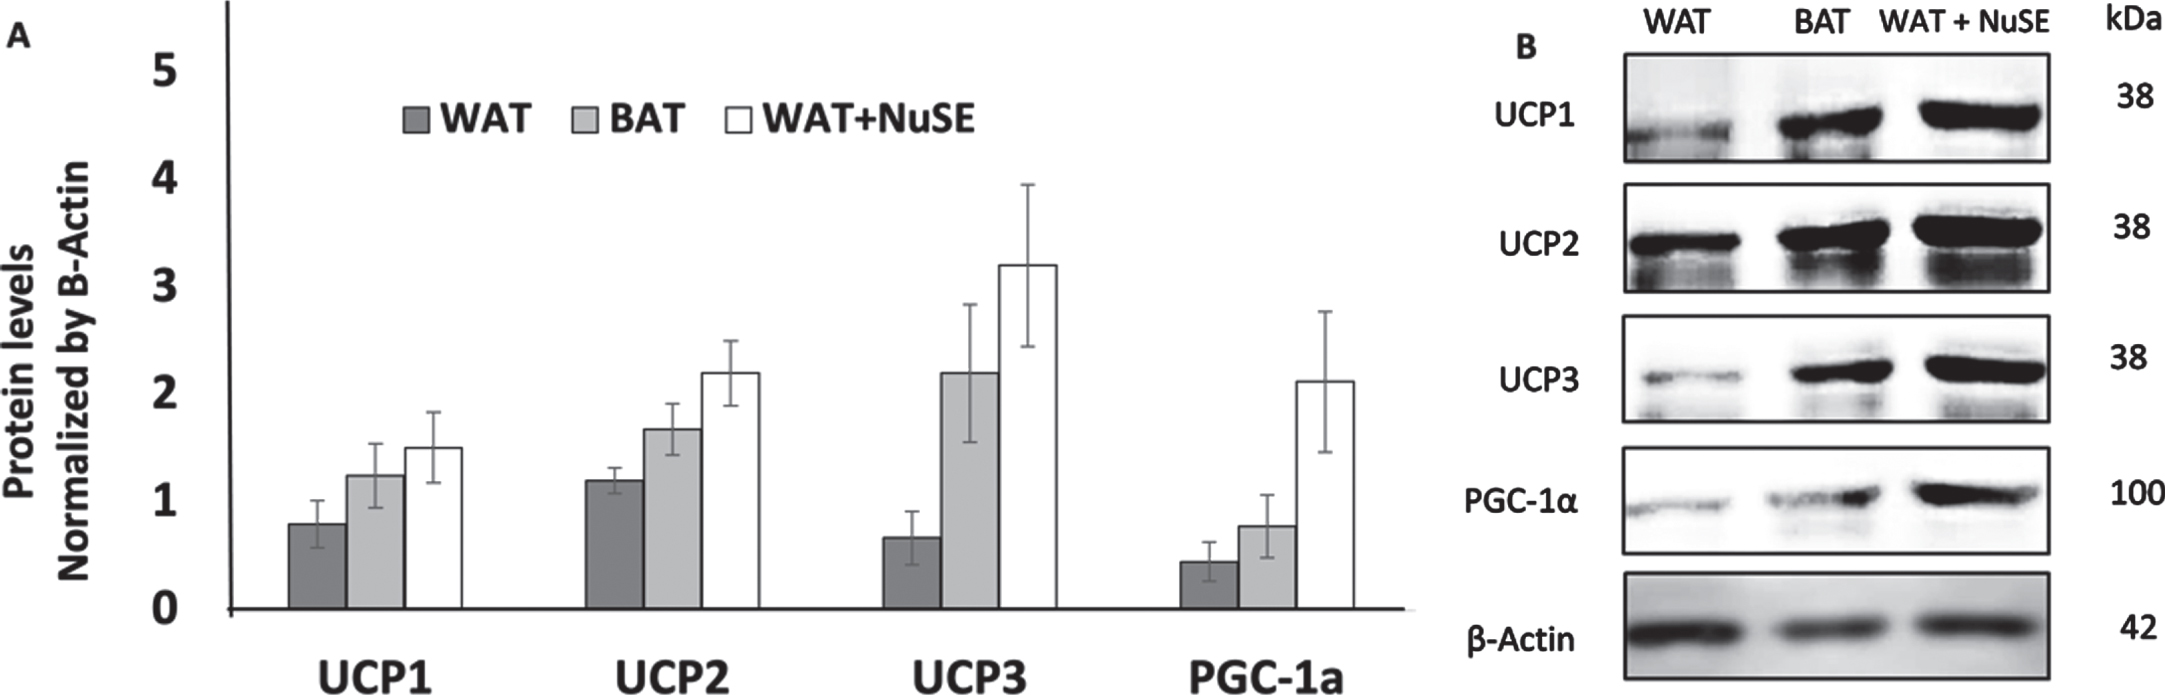 (A) NuSE has a tendency to increase the levels of UCP1, UCP2, UCP3, and PGC-1α (n = 4); (B) representative western blots showed an increase in UCP1, UCP2, UCP3, and PGC-1α levels in the NuSE group.